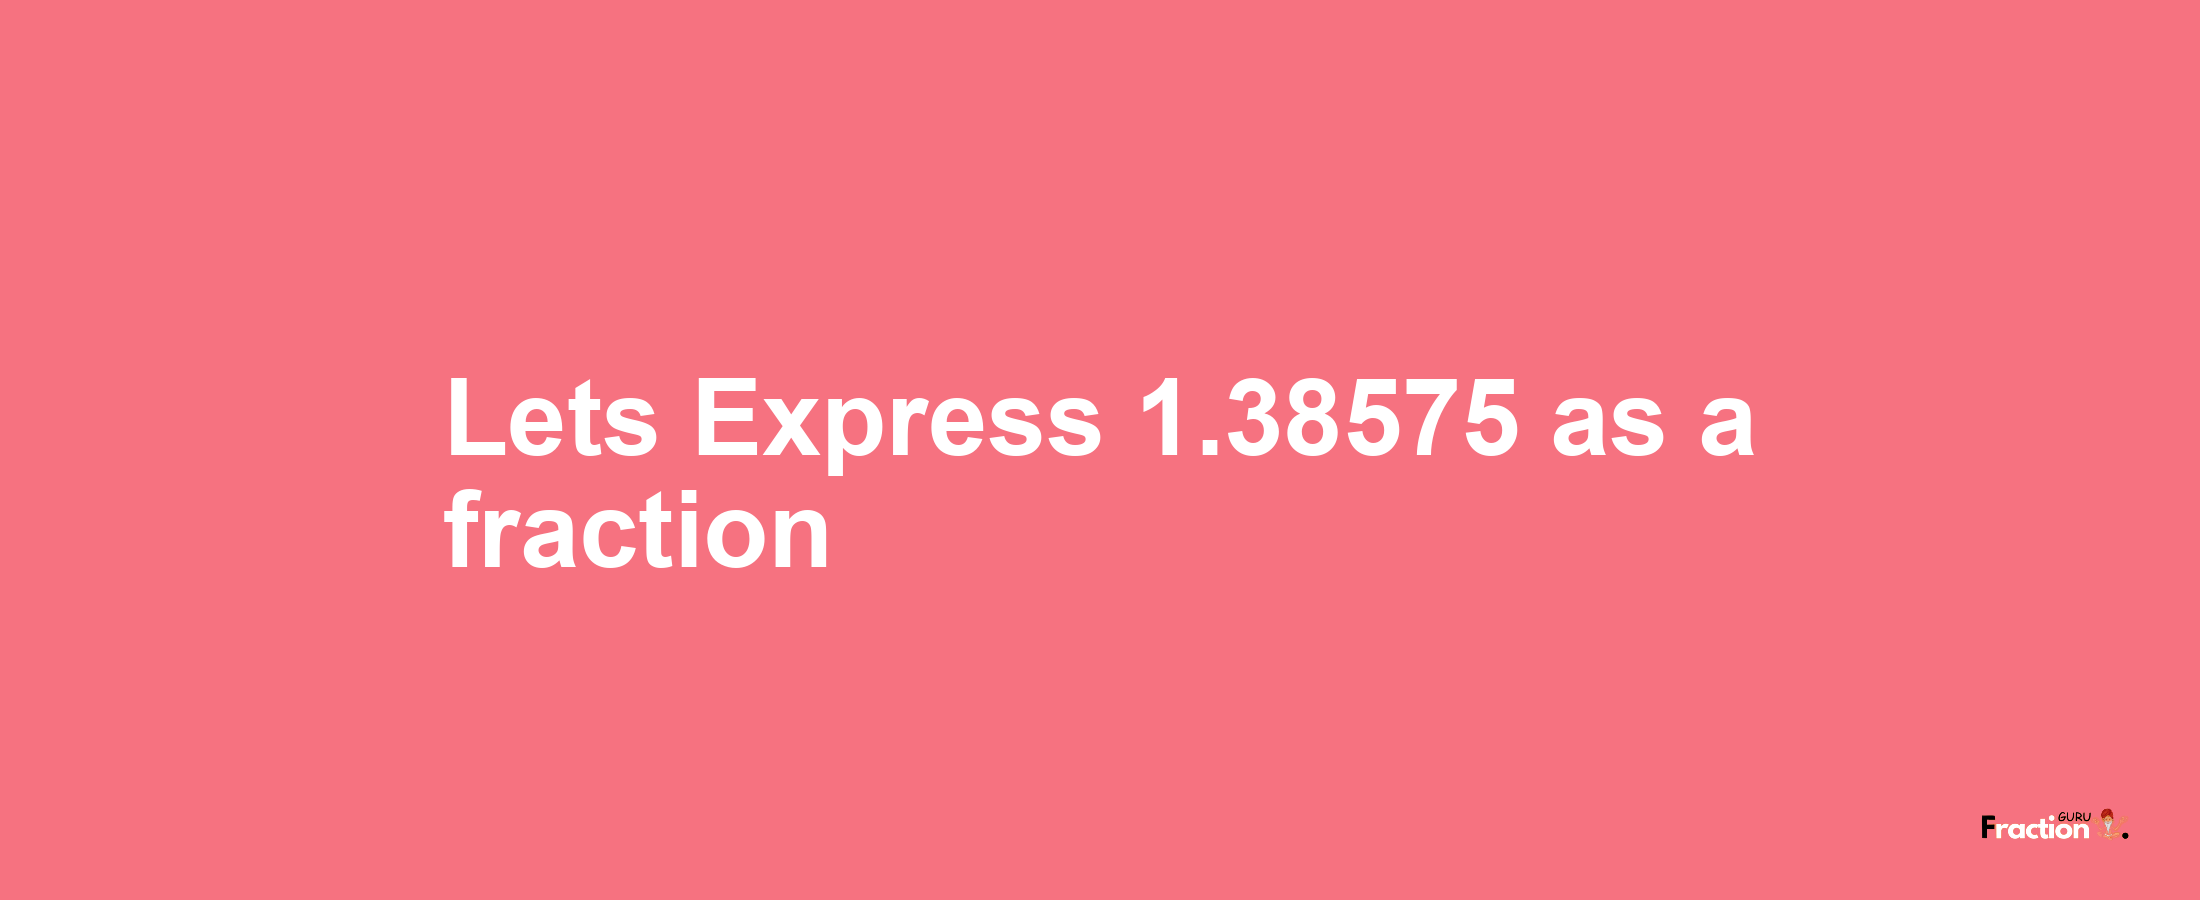 Lets Express 1.38575 as afraction